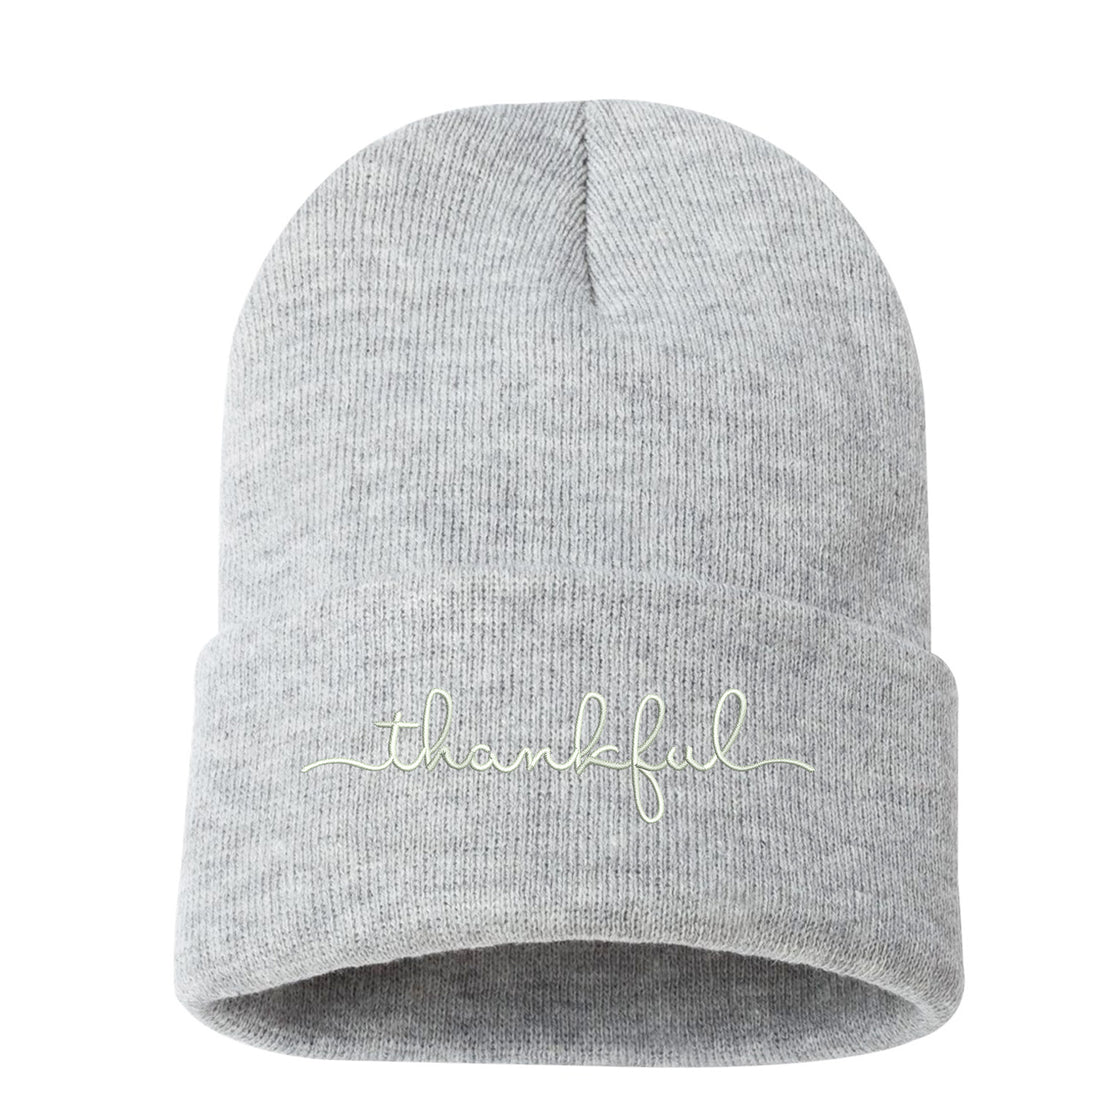 Fall Hat Blessed DSY Lifestyle Beanie – Accessories Cuffed |